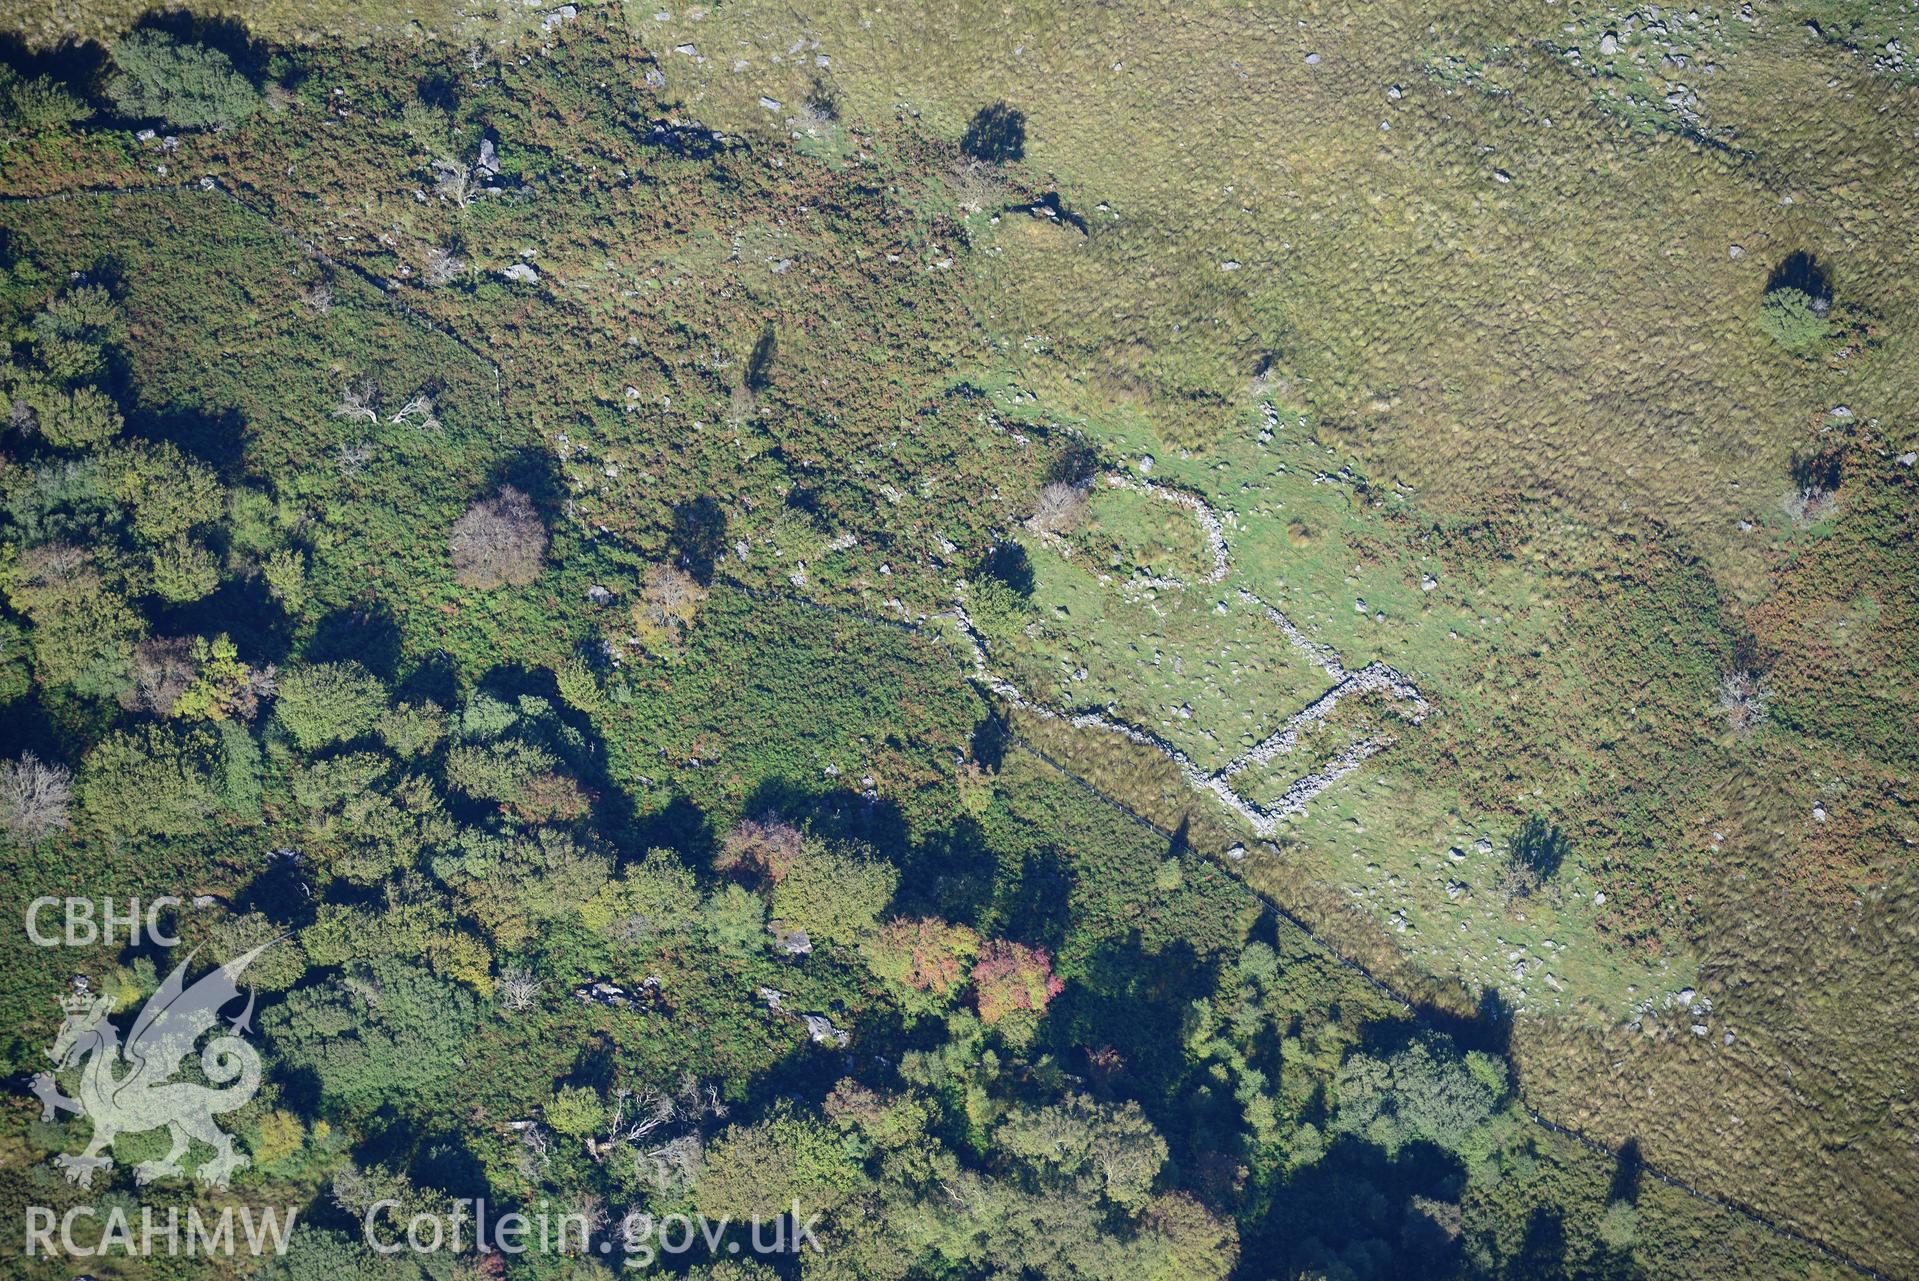 Structure at Ffridd-Bryn-Coch, between Ganllwyd and Bronaber. Oblique aerial photograph taken during the Royal Commission's programme of archaeological aerial reconnaissance by Toby Driver on 2nd October 2015.